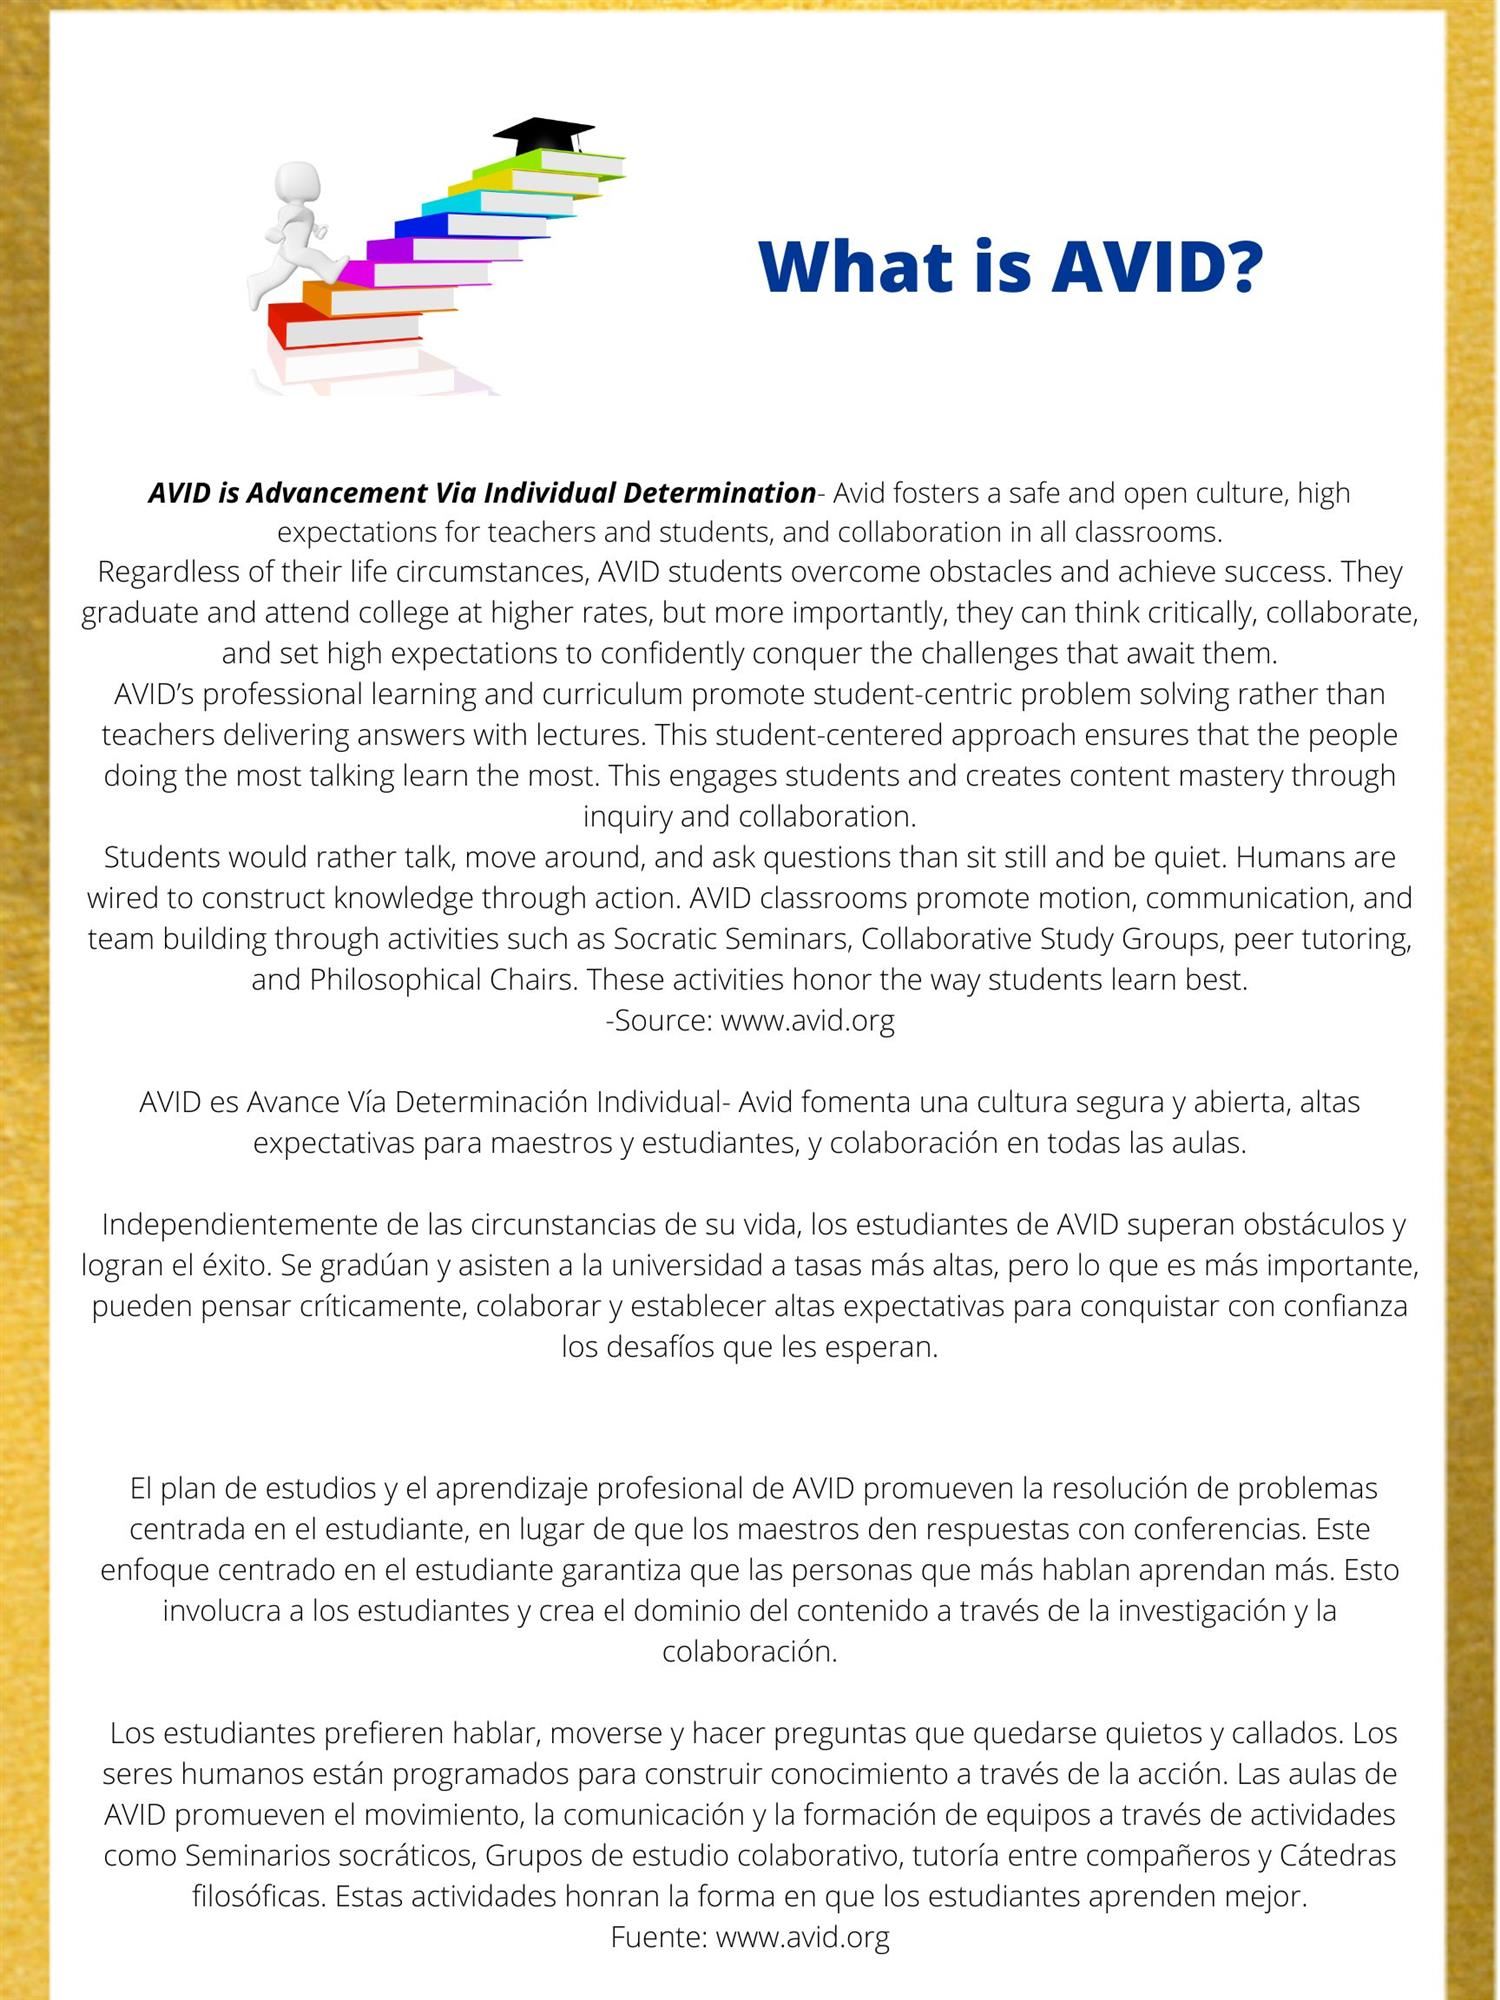 What is AVID?